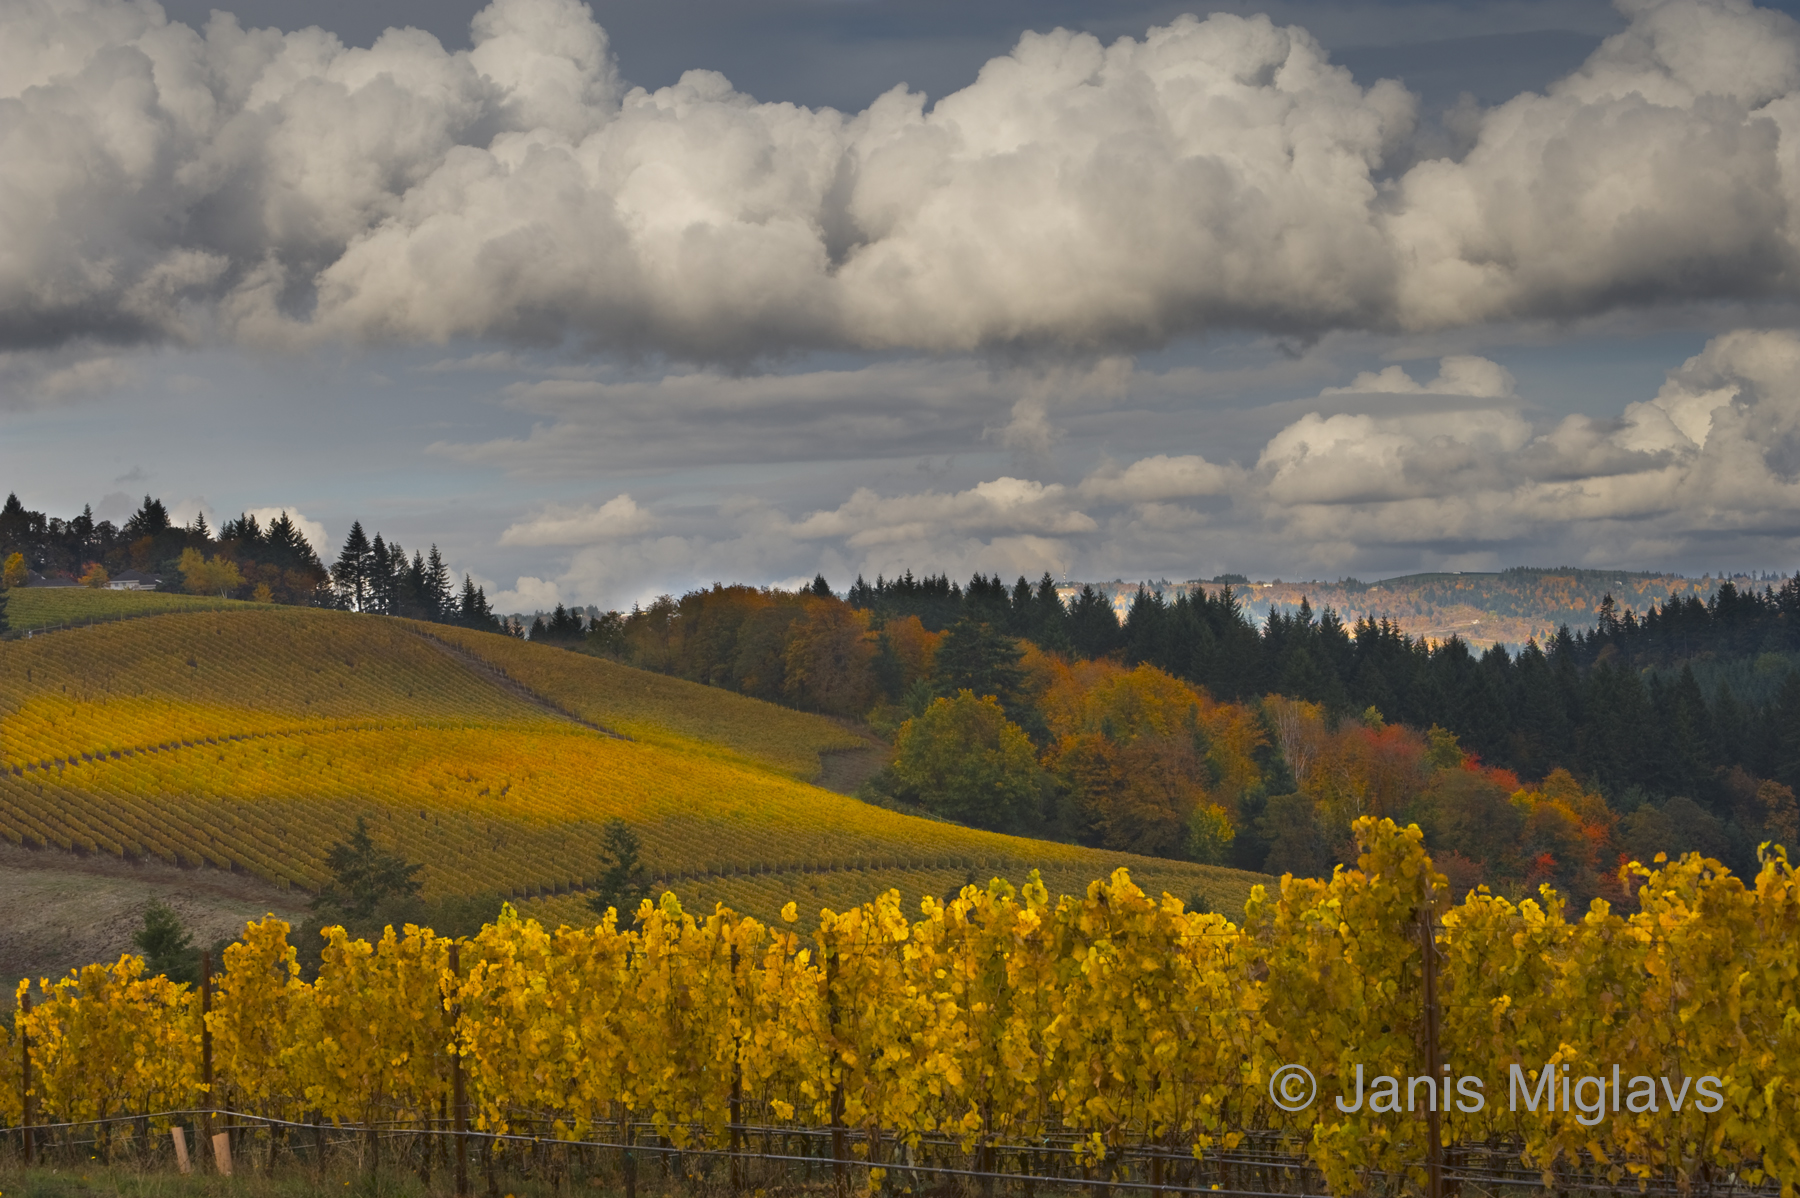 Clouds over Dundee Hills Vineyards